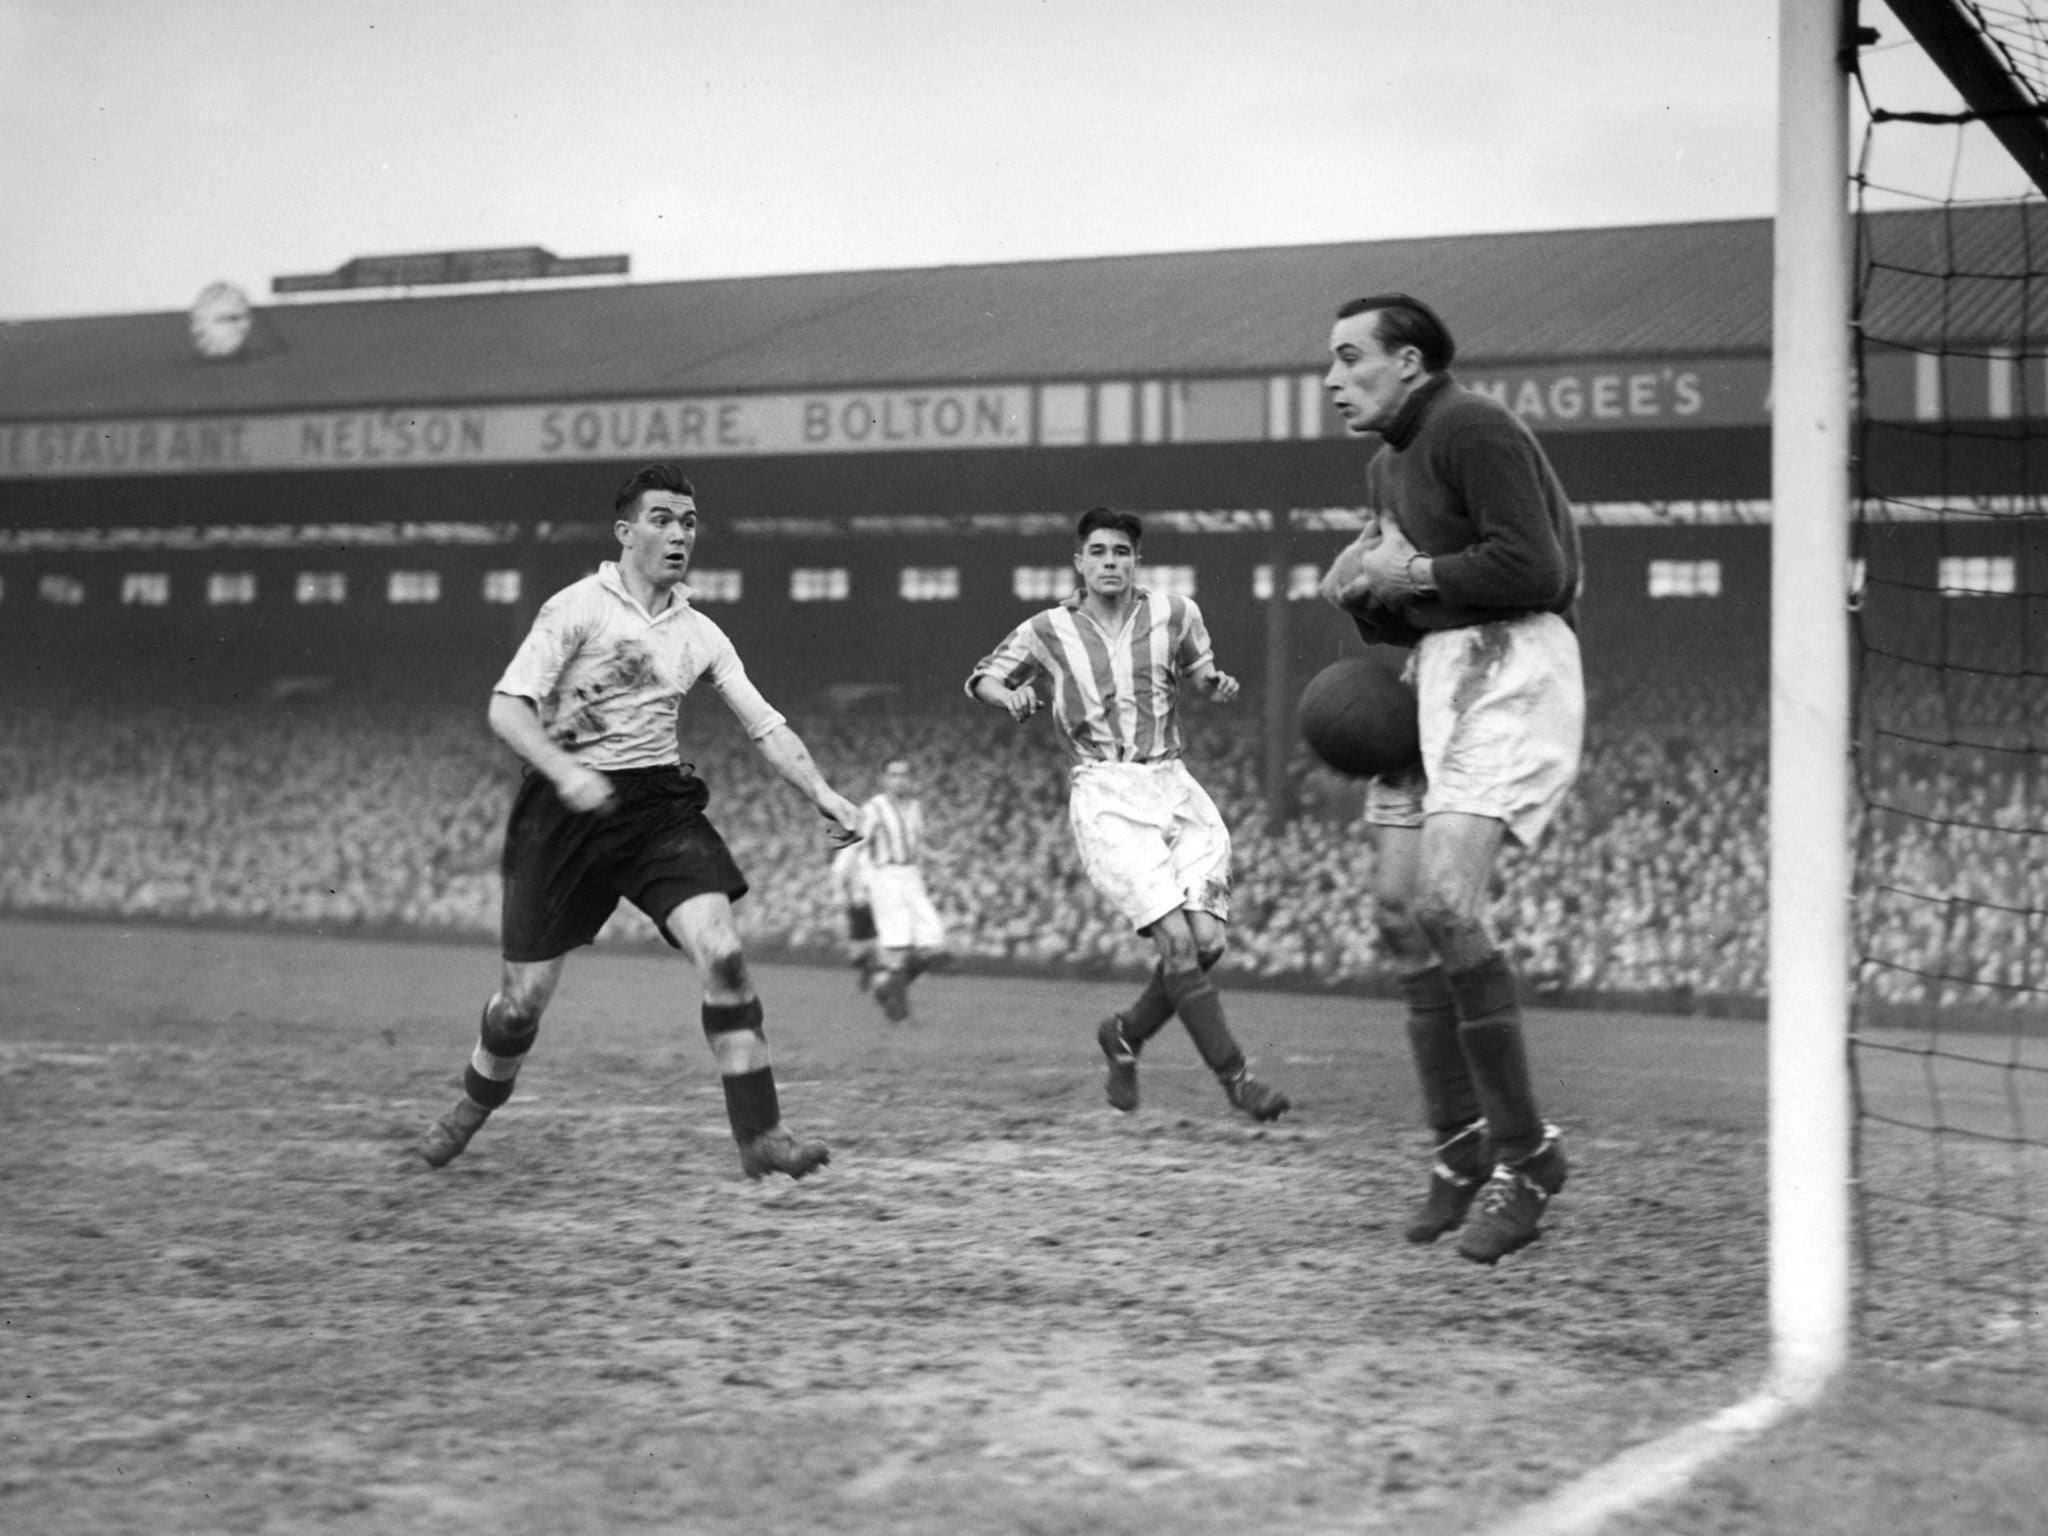 Barrass, left, goes goal-poaching as the Stoke goalkeeper Dennis Herod fumbles the ball in August 1948